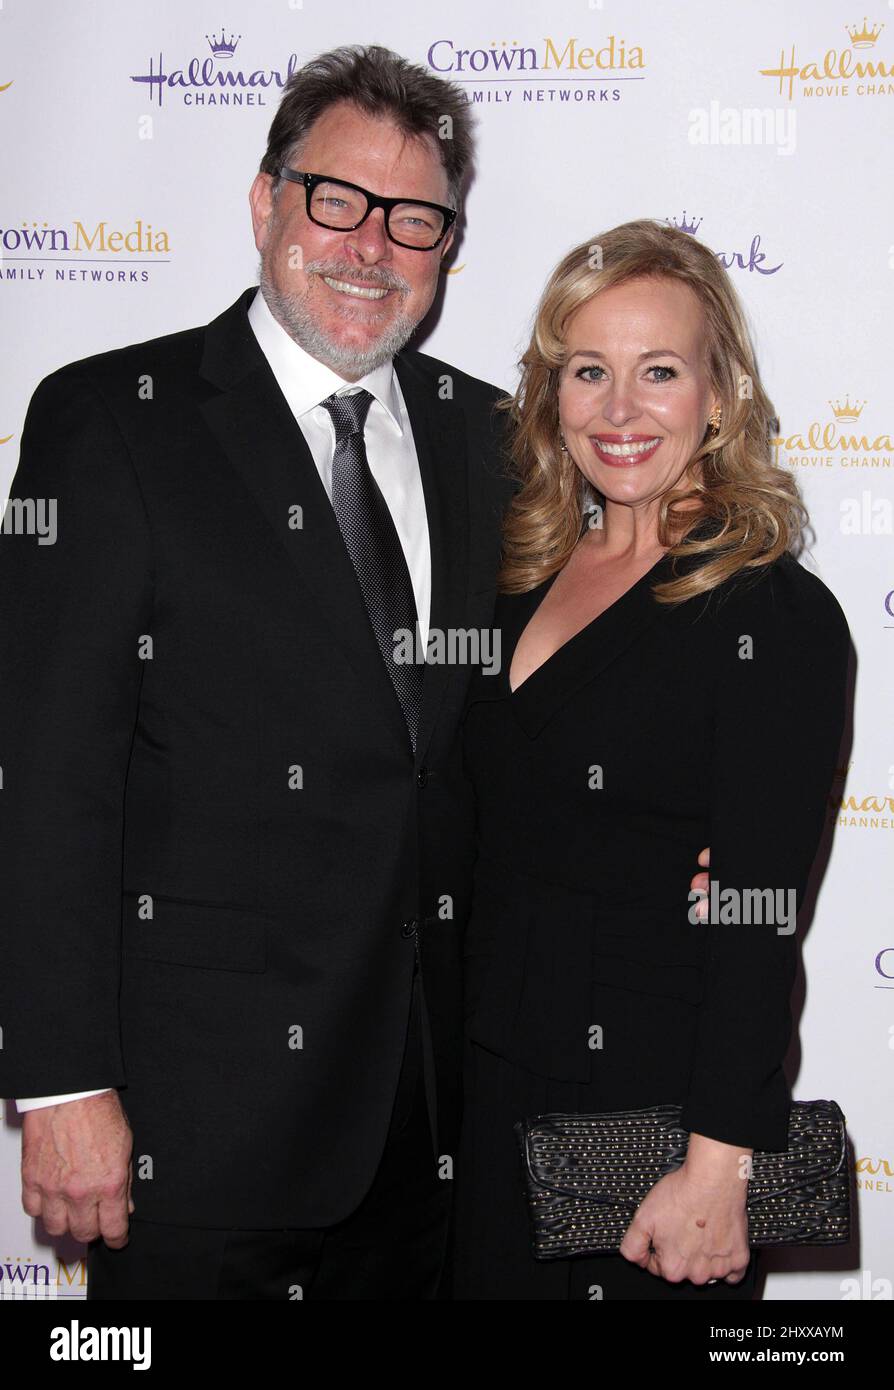 Jonathan Frakes and Genie Francis during the Hallmark Evening Gala during the 2012 TCA Winter Press Tour held at the Tournament House, California Stock Photo